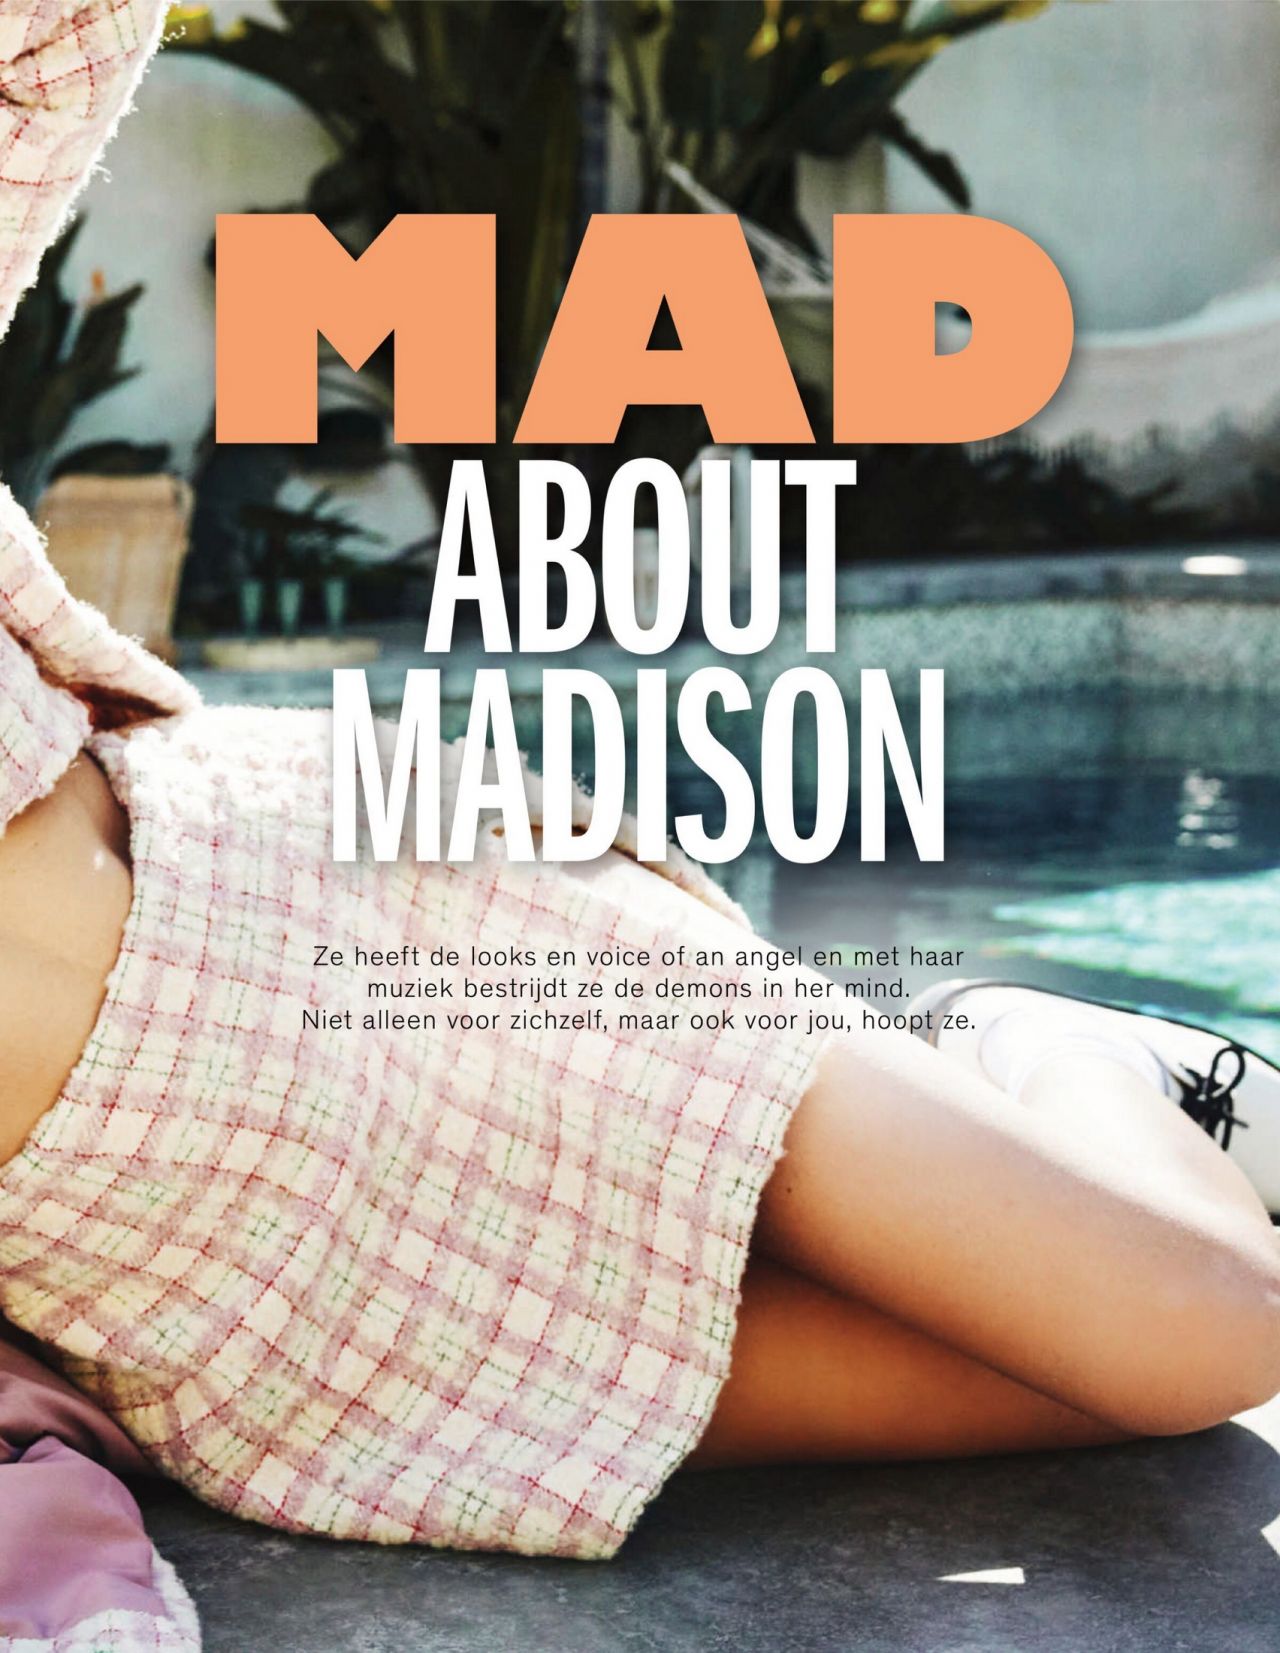 Madison Beer - CosmoGIRL! March 2021 Issue • CelebMafia